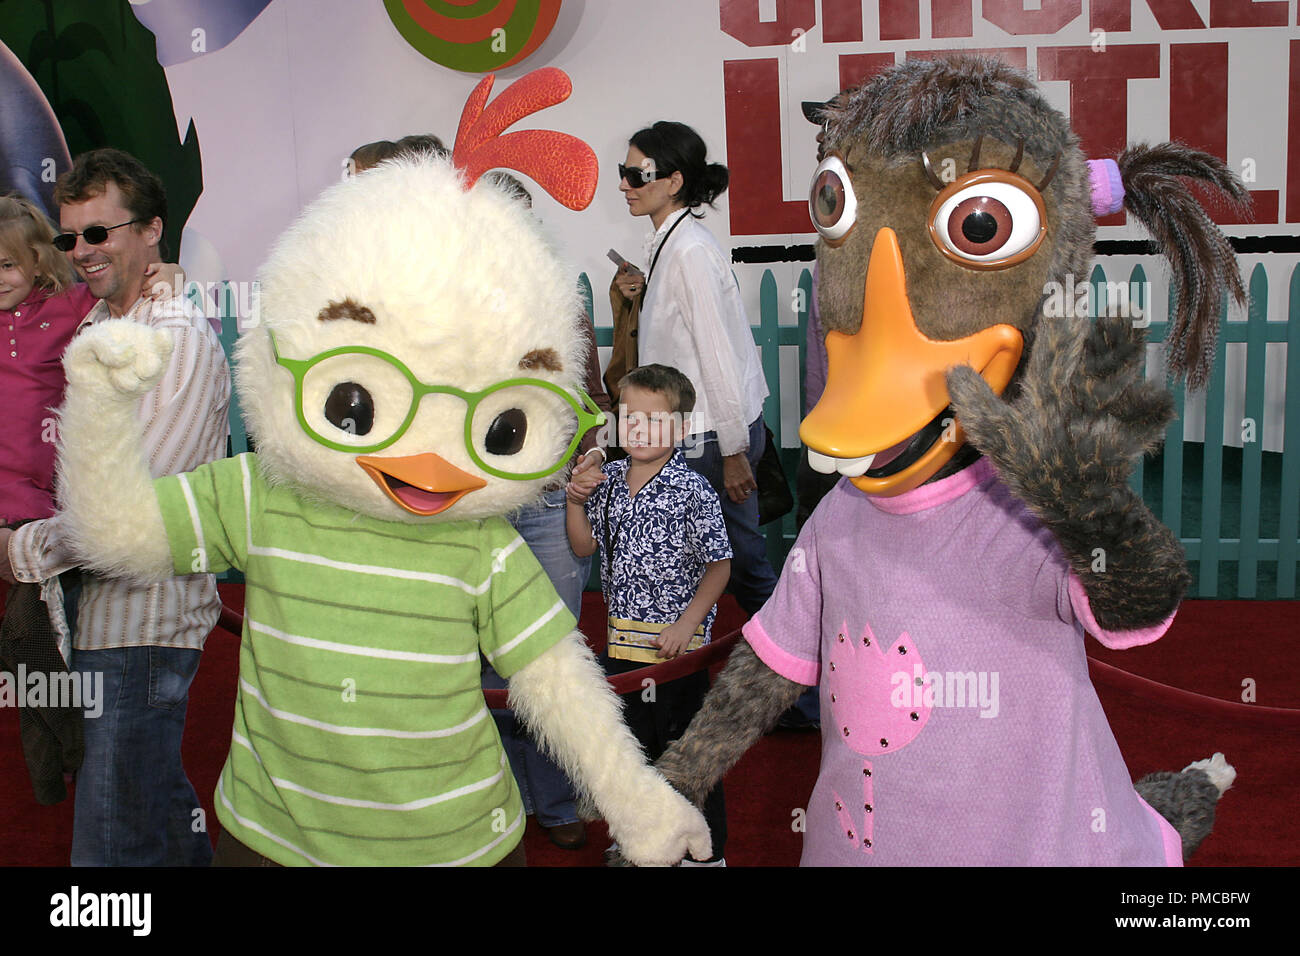 'Chicken Little' (Premiere) Chicken Little and The Ugly Duckling 10-30-2005 / El Capitan Theater / Hollywood, CA / Walt Disney Pictures / Photo by Joseph Martinez / PictureLux  File Reference # 22520 0059-picturelux  For Editorial Use Only - All Rights Reserved Stock Photo